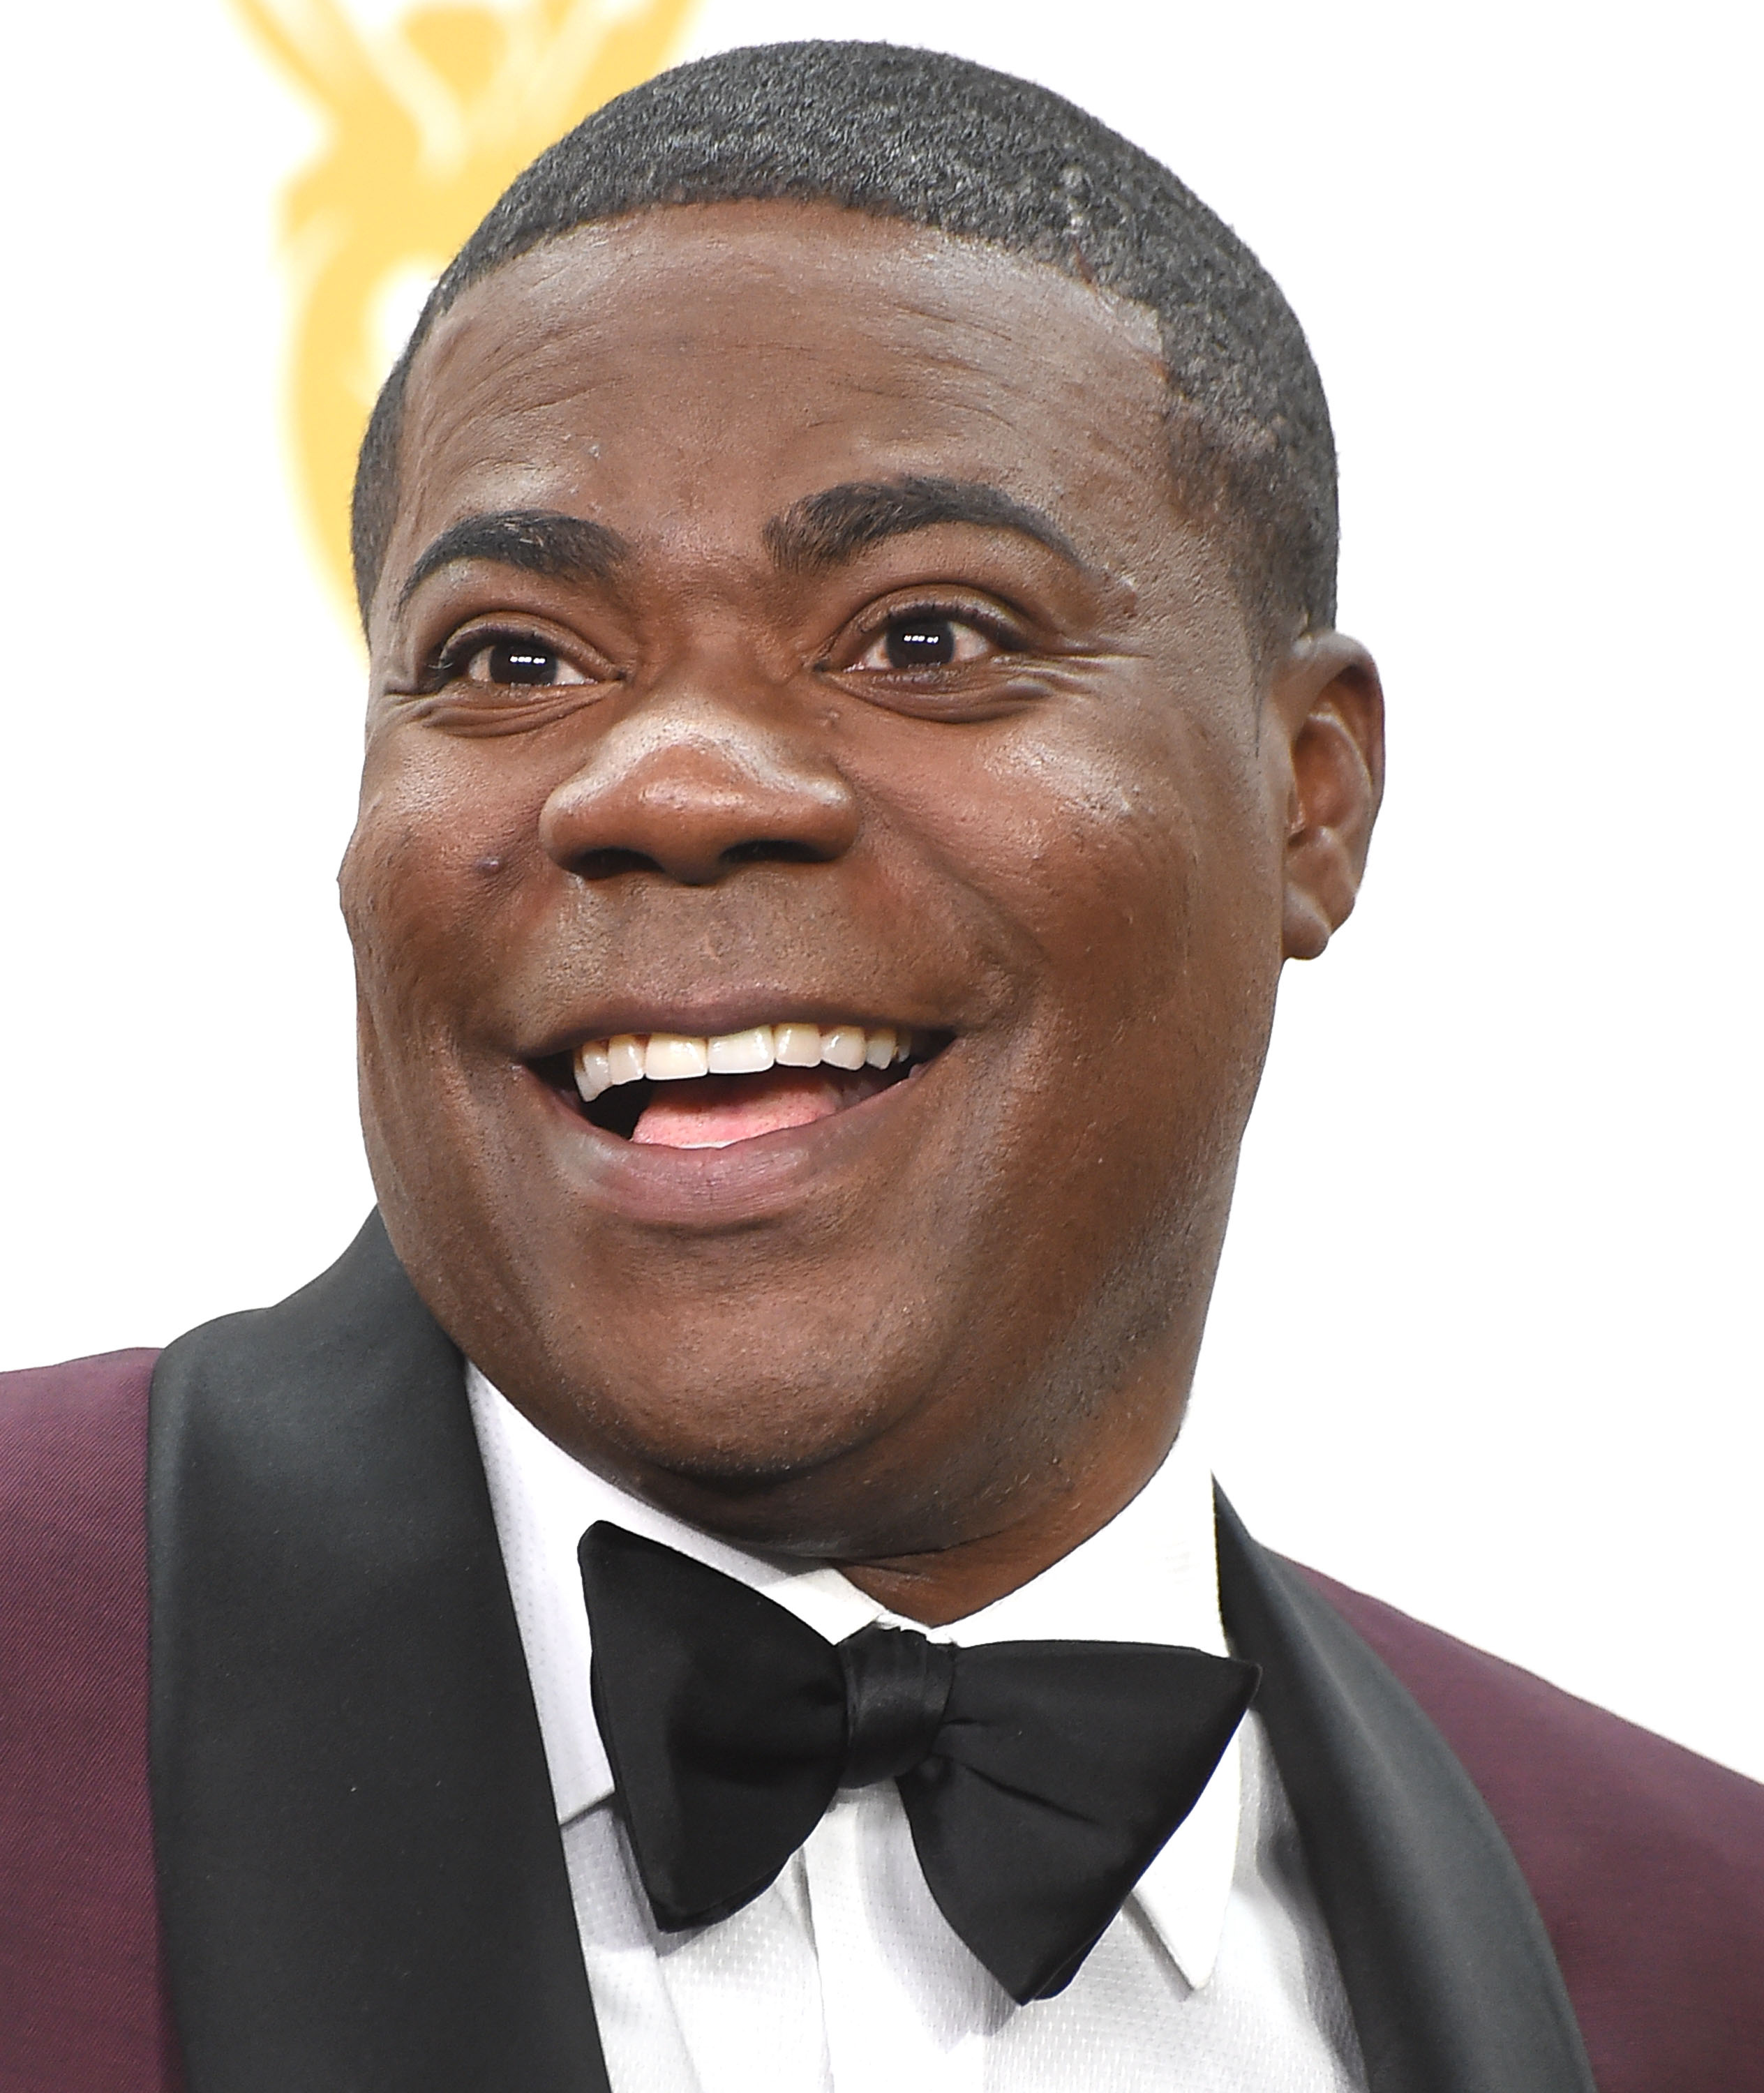 Tracy Morgan poses at the 67th Annual Primetime Emmy Awards at Microsoft Theater on September 20, 2015 in Los Angeles, California.  (Photo by Steve Granitz/WireImage) (Steve Granitz—WireImage/Getty Images)